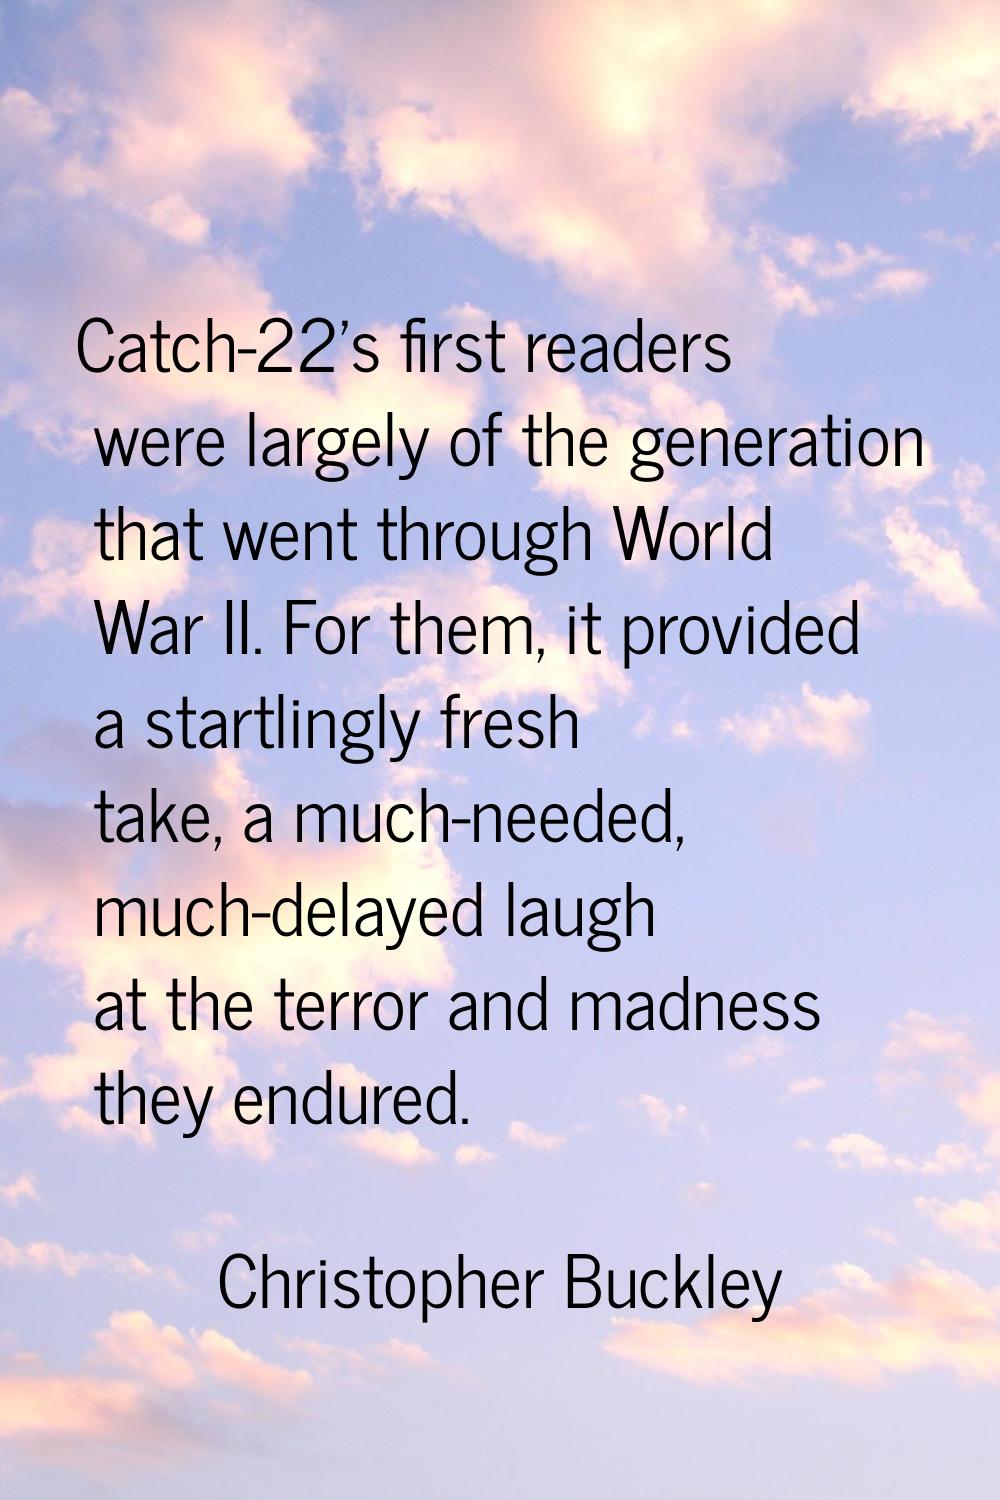 Catch-22's first readers were largely of the generation that went through World War II. For them, i